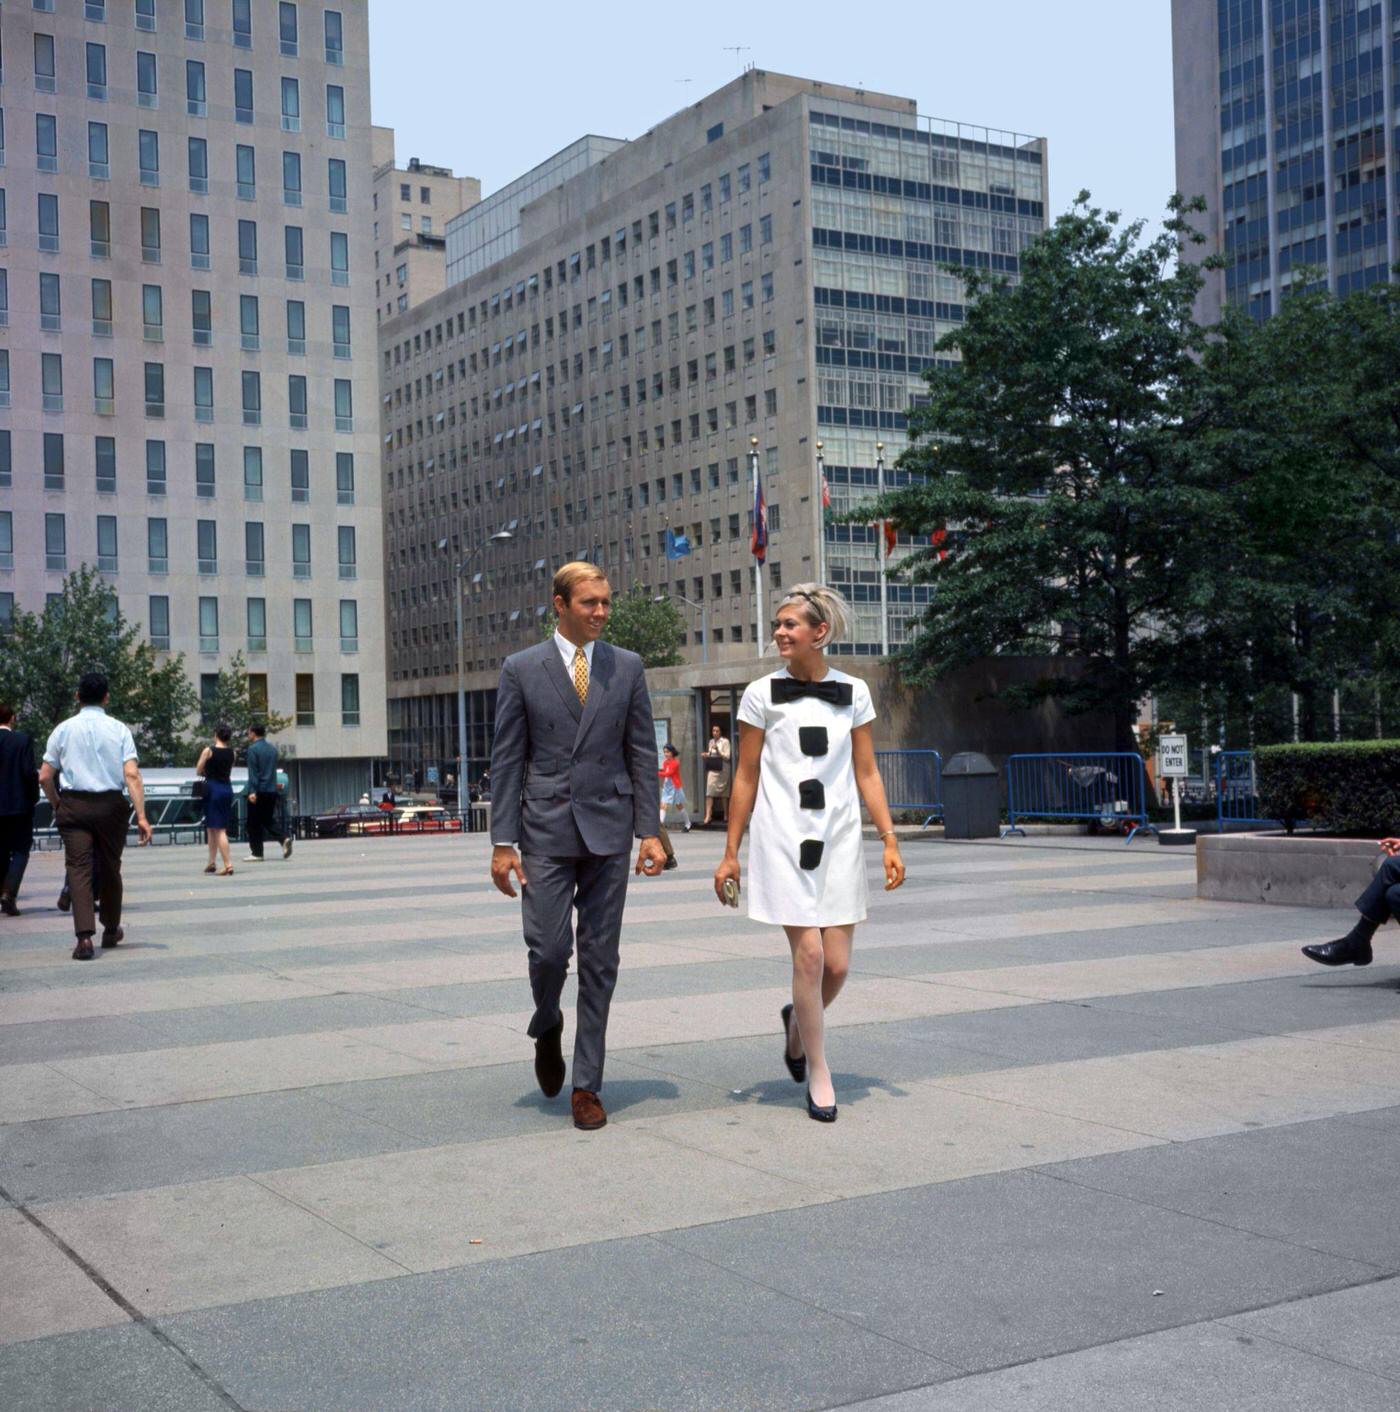 Man And Woman Walk Side By Side In Downtown Manhattan, 1967